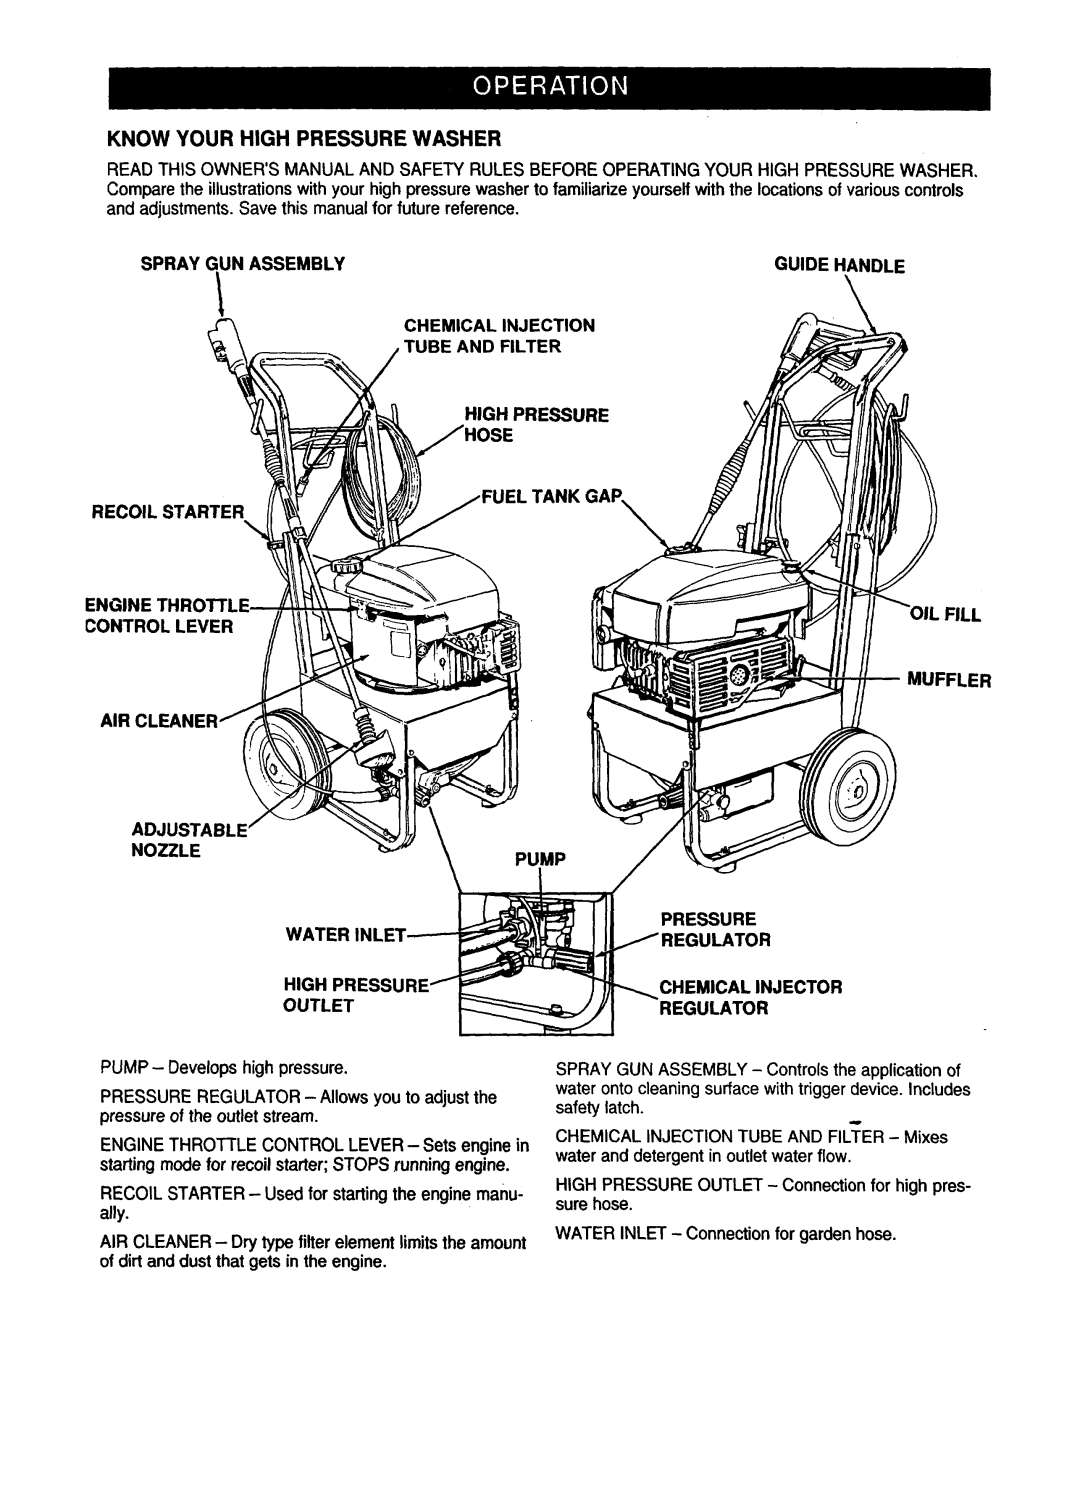 Craftsman 580.76225 owner manual Know Your High Pressure Washer 